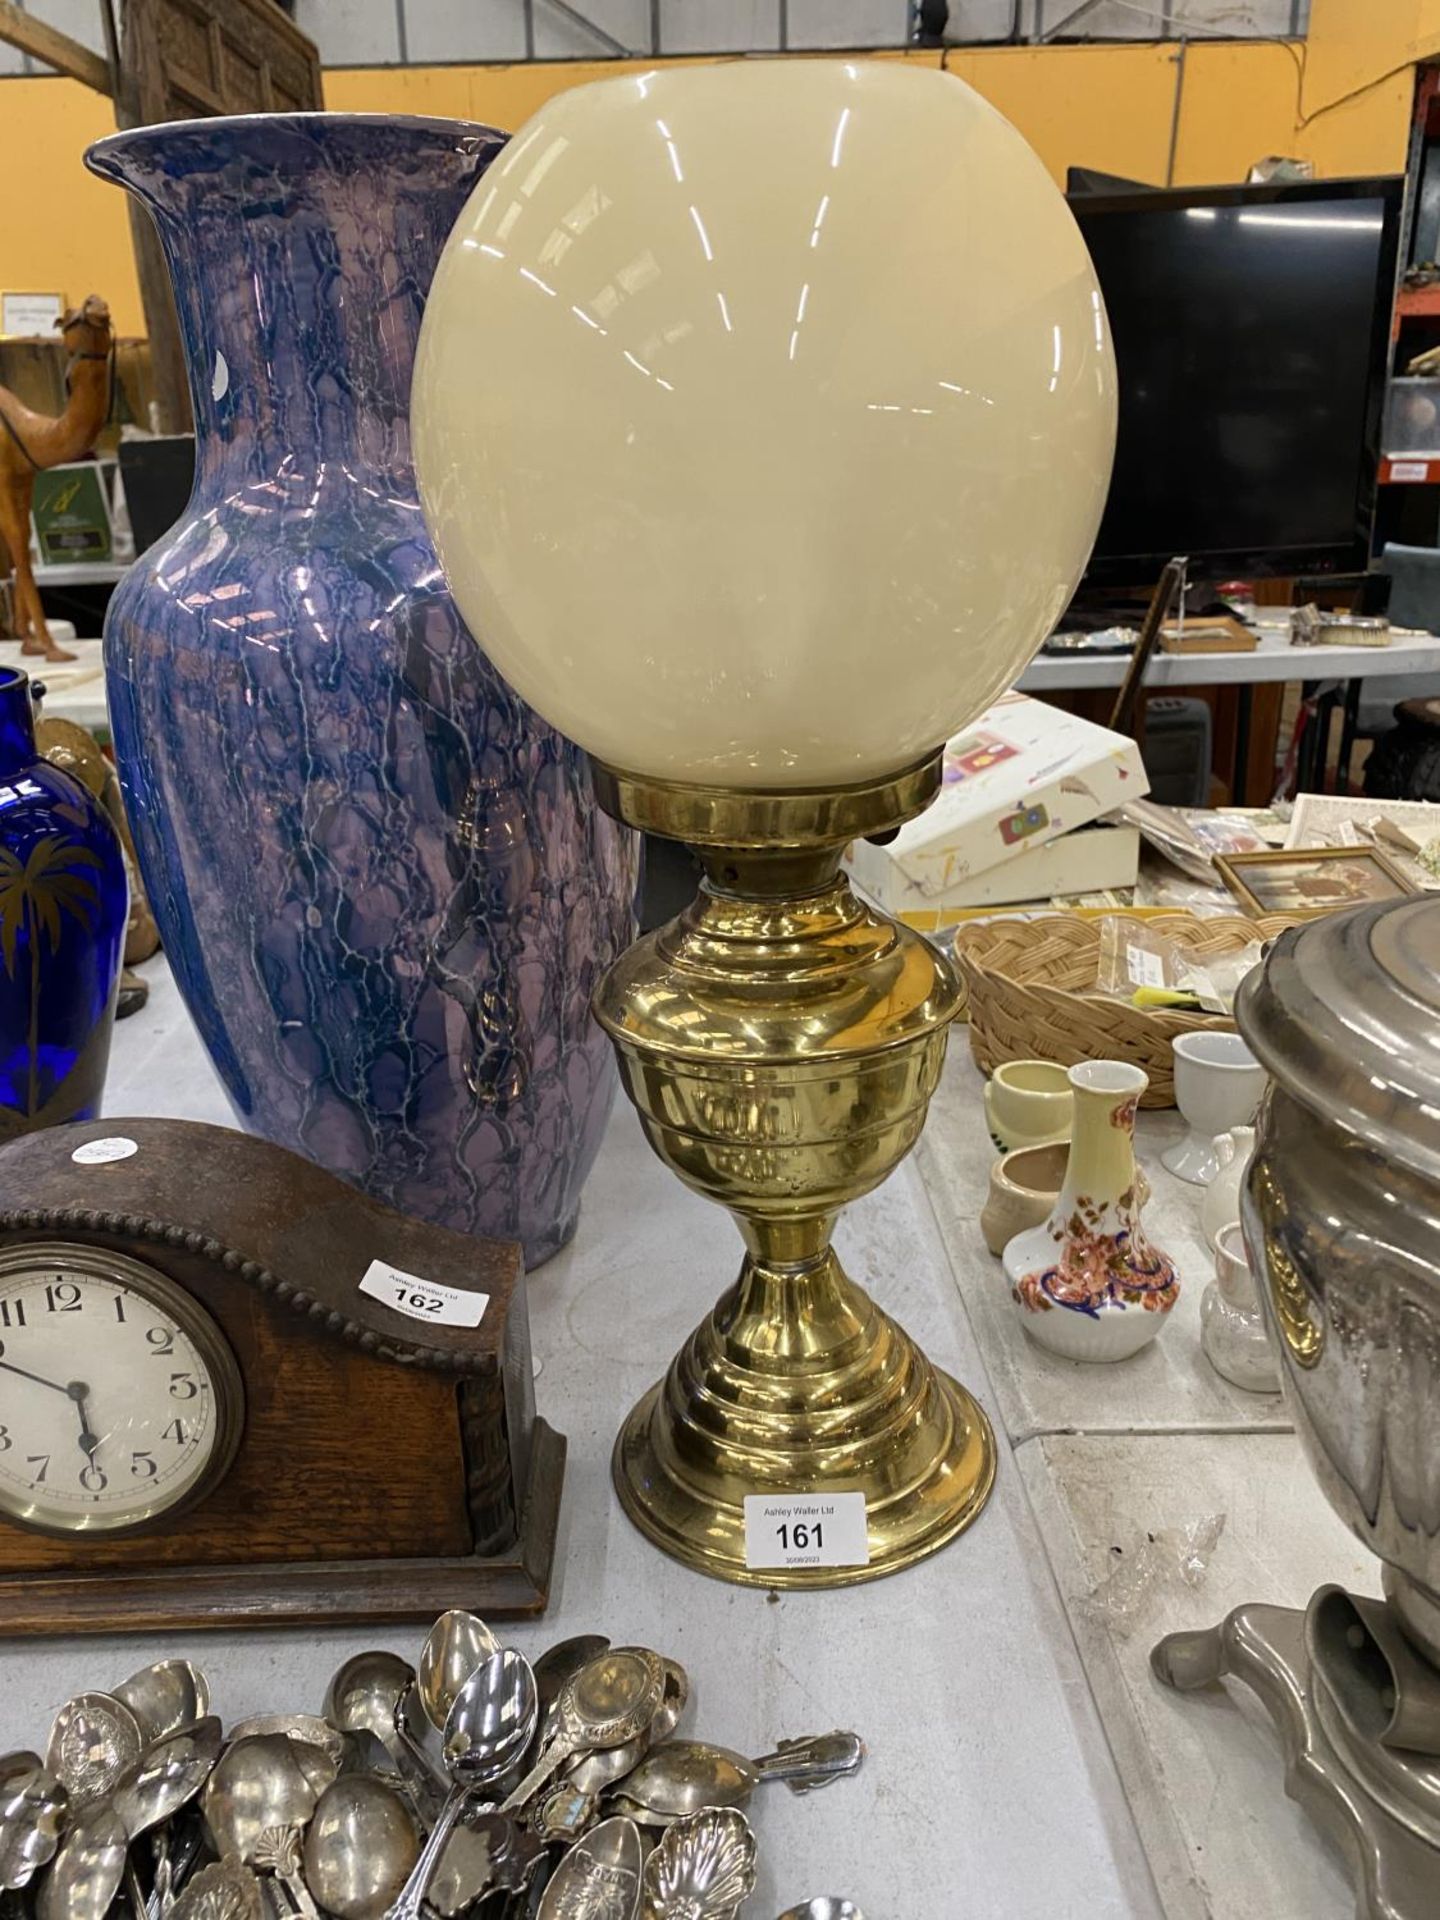 A VINTAGE BRASS OIL LAMP WITH A GLASS SHADE